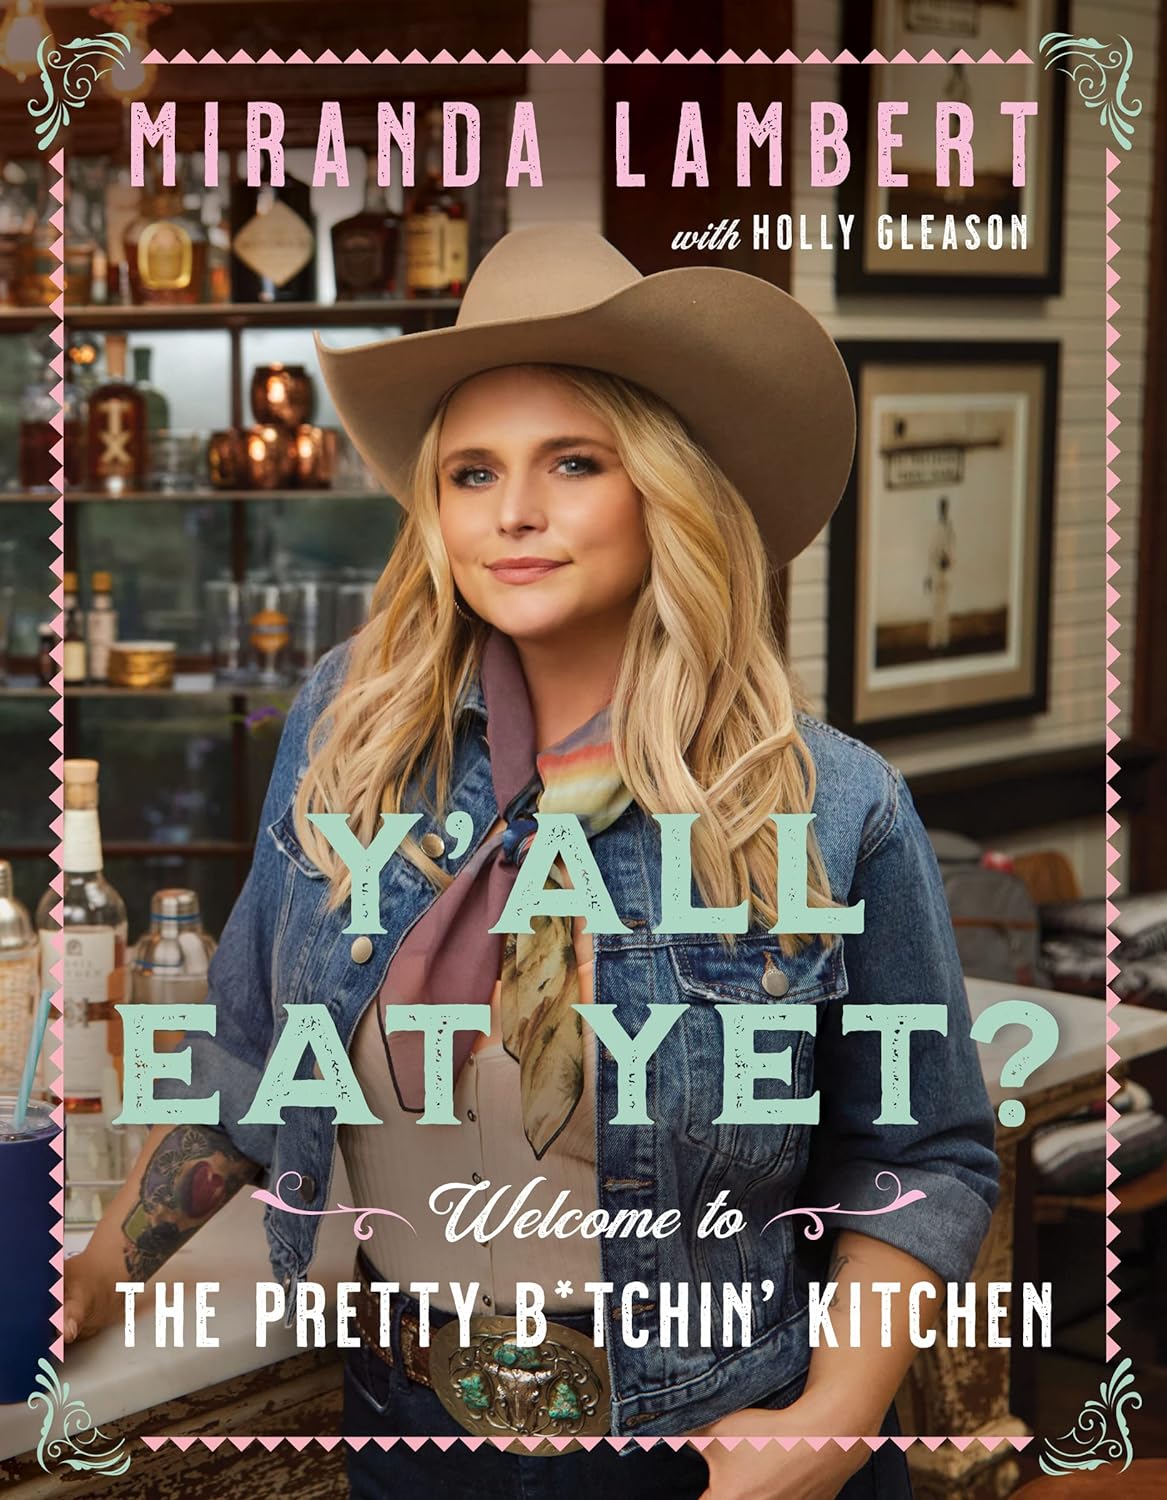 Yall Eat Yet?: Welcome to the Pretty B*tchin Kitchen     Hardcover – April 25, 2023